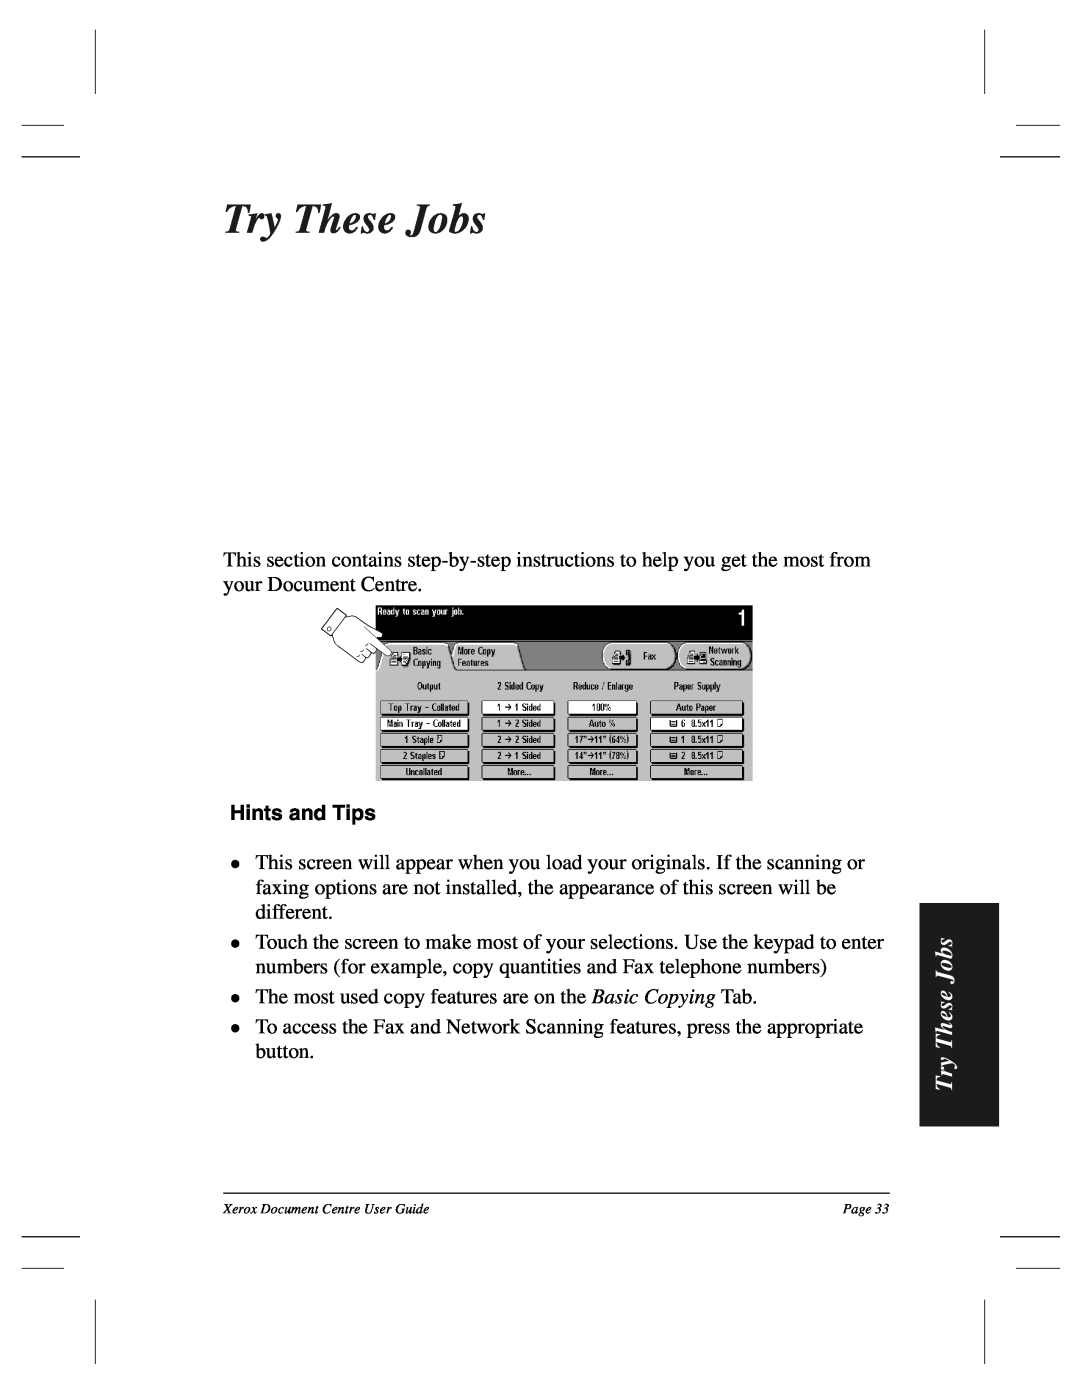 Xerox 460 DC, 470 ST, 460 ST, 470 DC, 255 DC, 240 DC, 265 DC manual Try These Jobs, lHints and Tips 